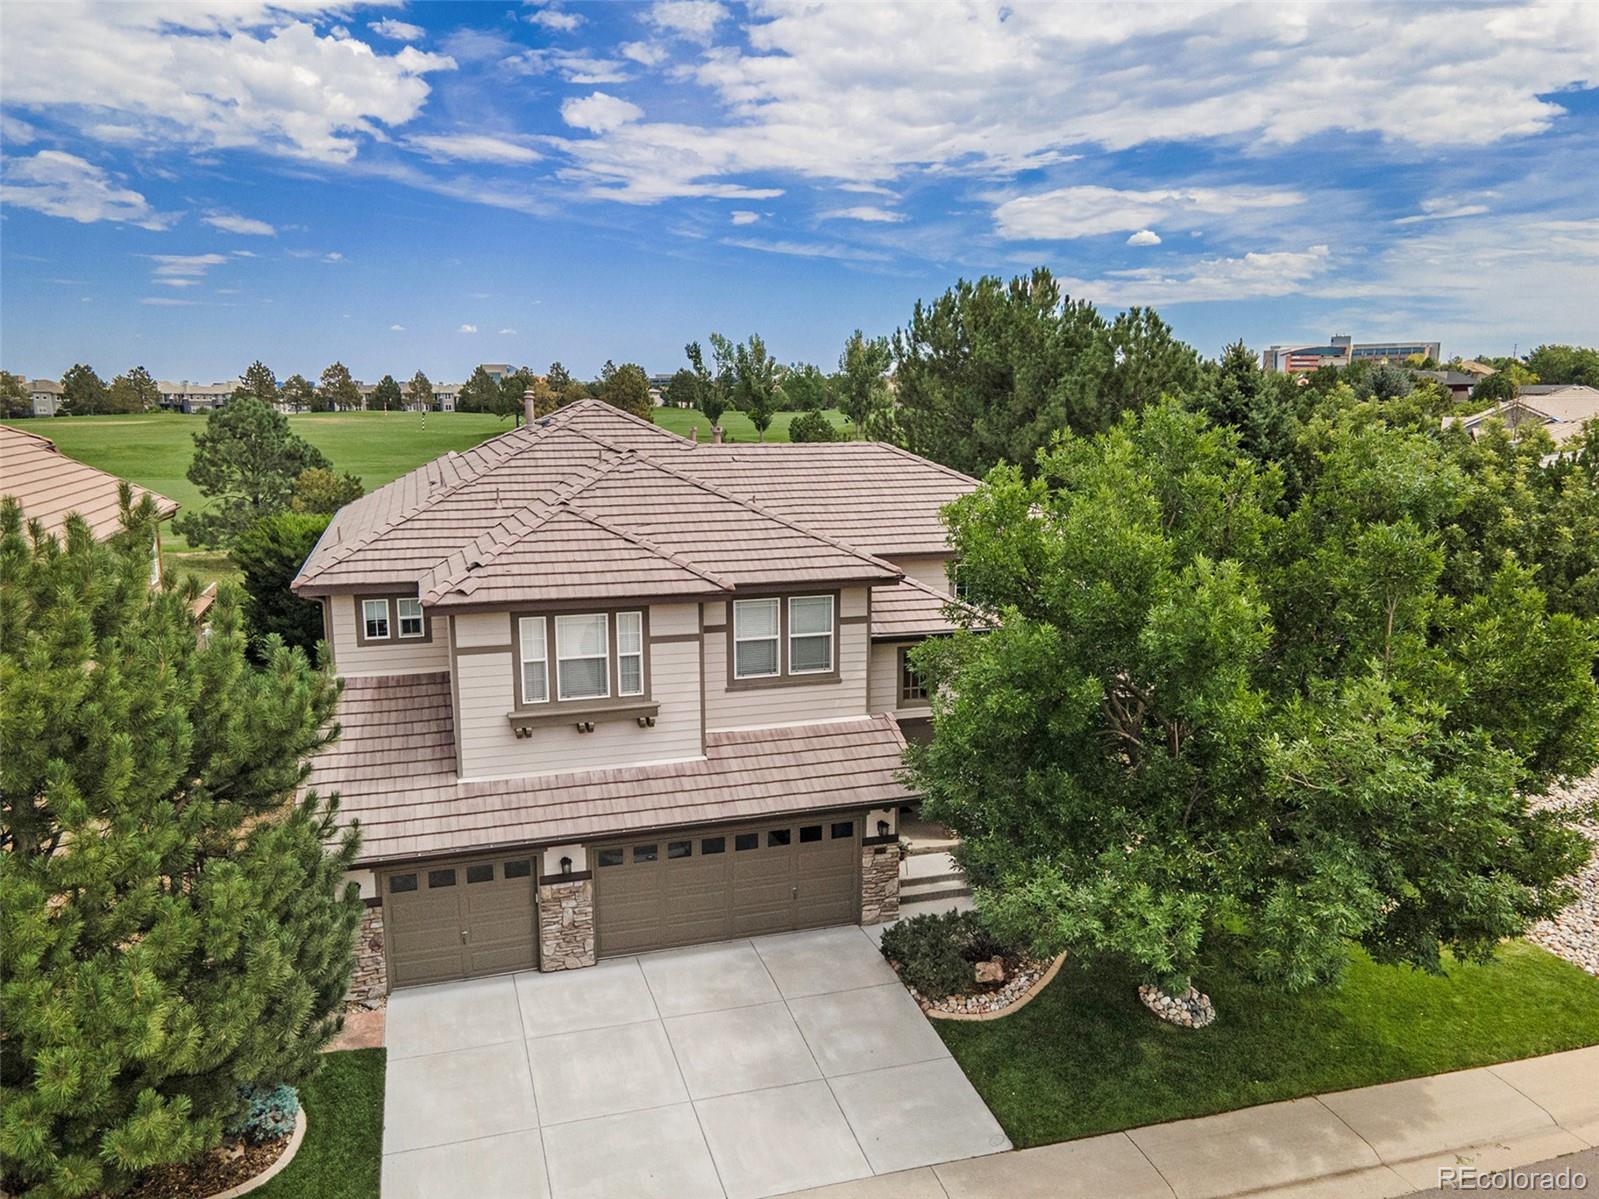 8974  hunters way, highlands ranch sold home. Closed on 2023-12-04 for $1,170,000.